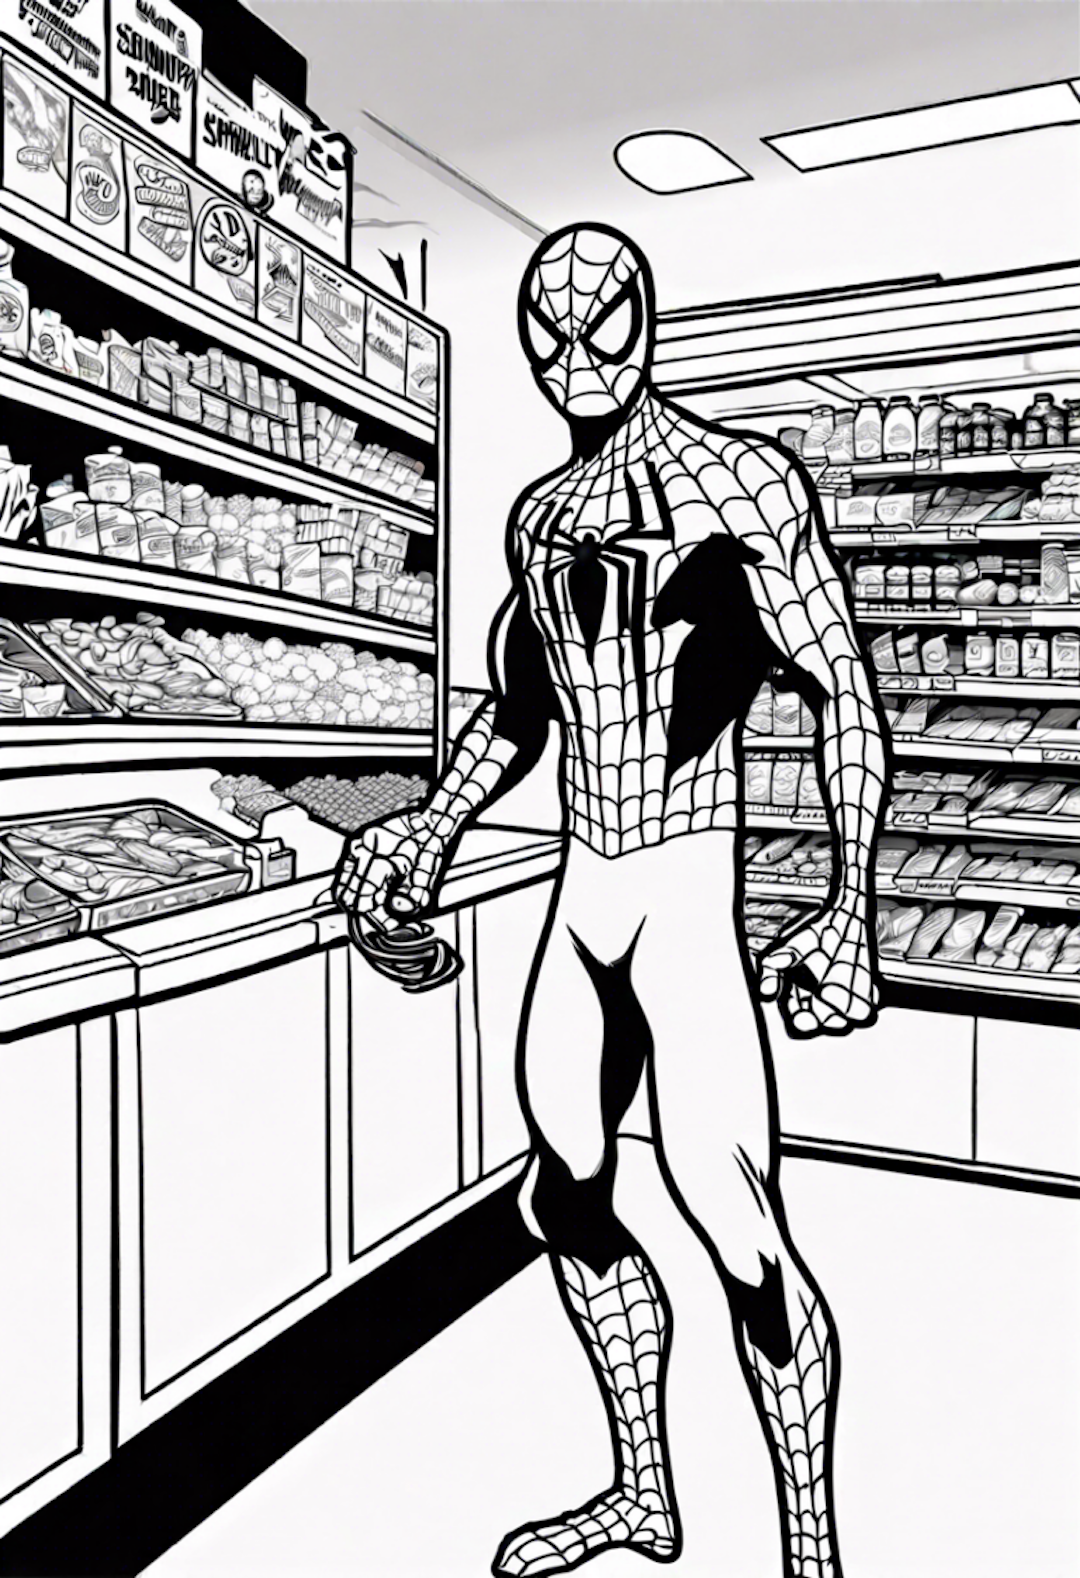 Spiderman Stopping A Robbery In A Convenience Store coloring pages